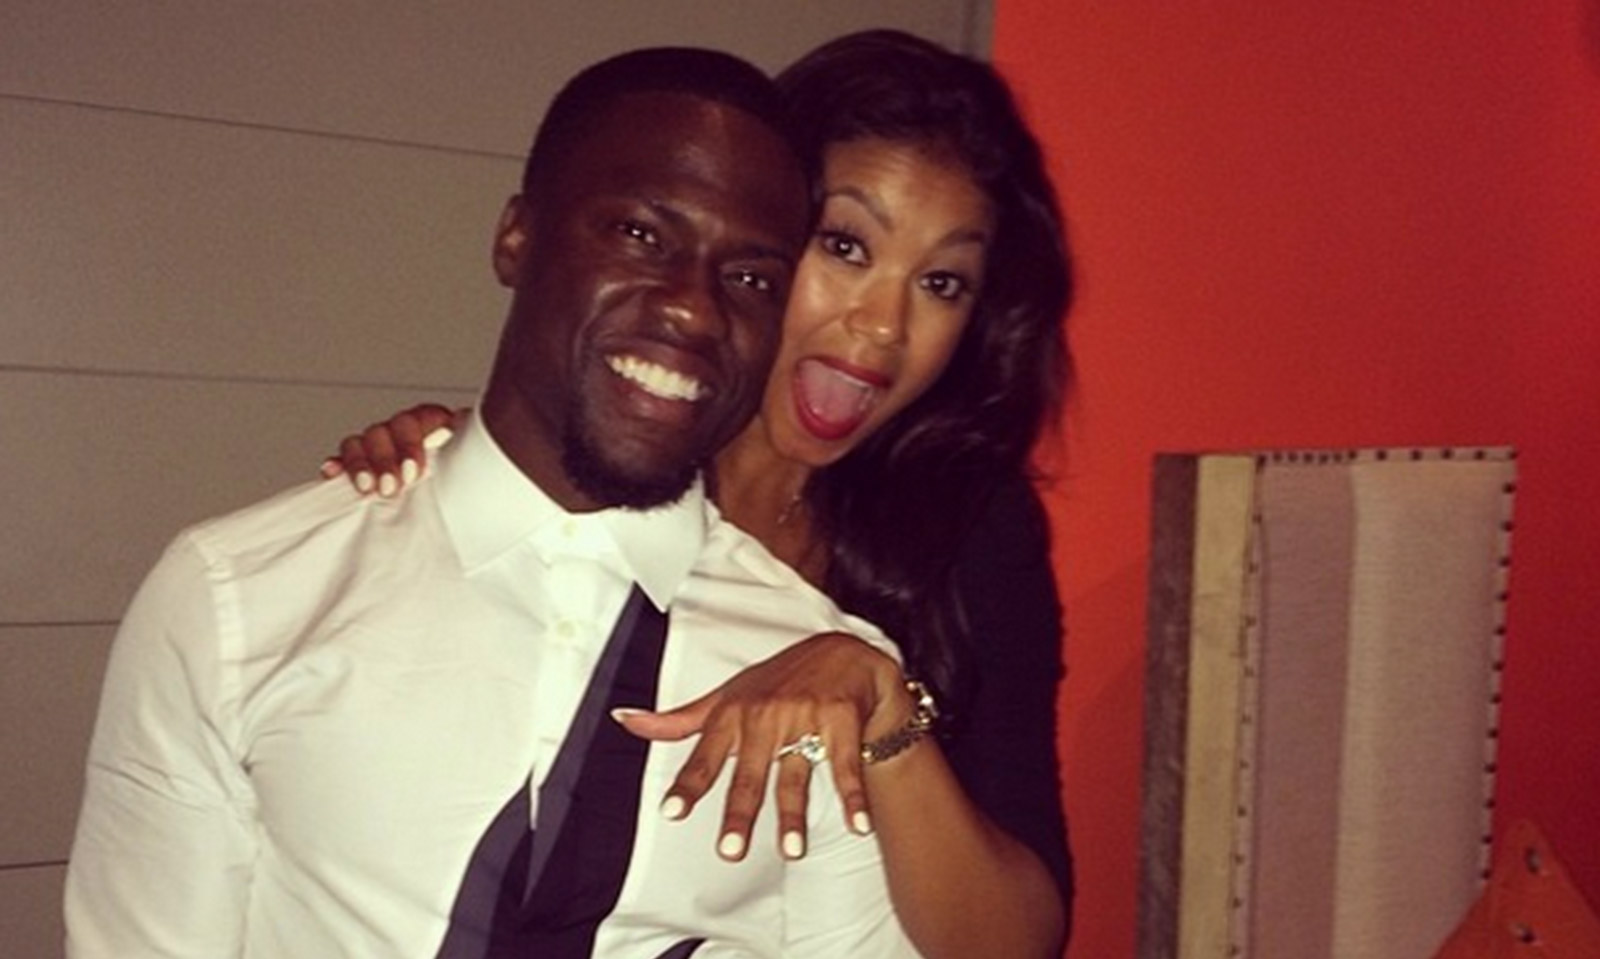 #SheSaidYes – Kevin Hart Proposes To Long Time Girlfriend, Eniko Parrish